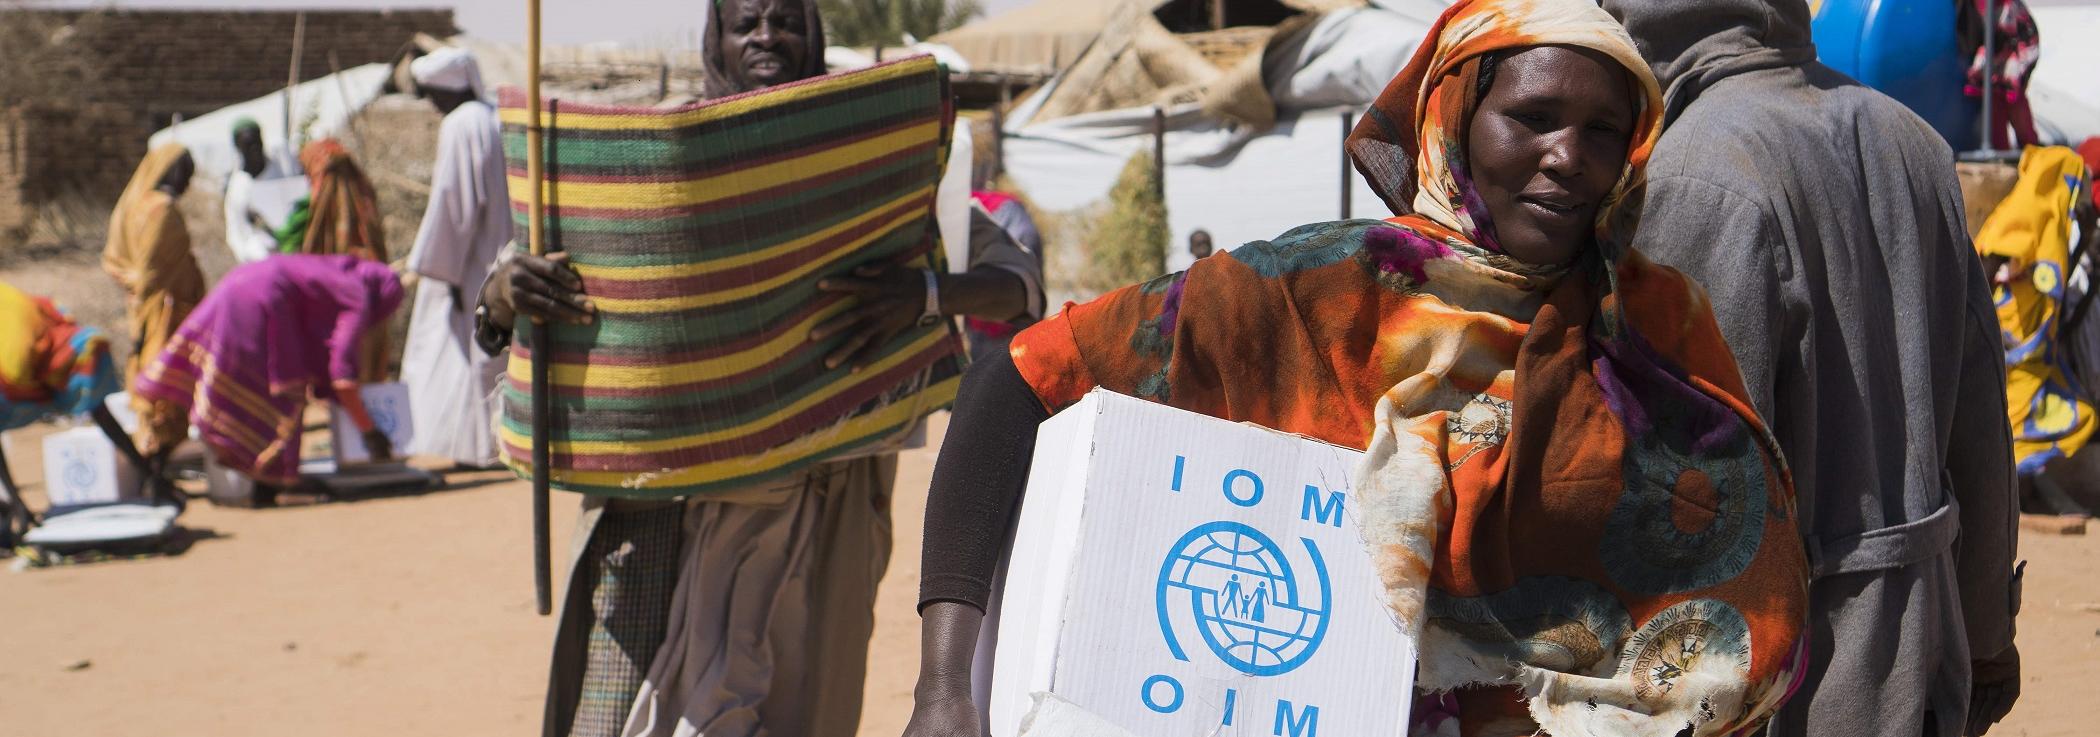 Non Food Items (NFIs) distribution conducted targeting 1,000 of the most vulnerable IDPs households in three camps - Shangle Tobay, Shatat, and Um Daresay, the newly displaced IDPs had access to some NFIs but the protracted IDPs from a previous caseload had not received any support since 2014.